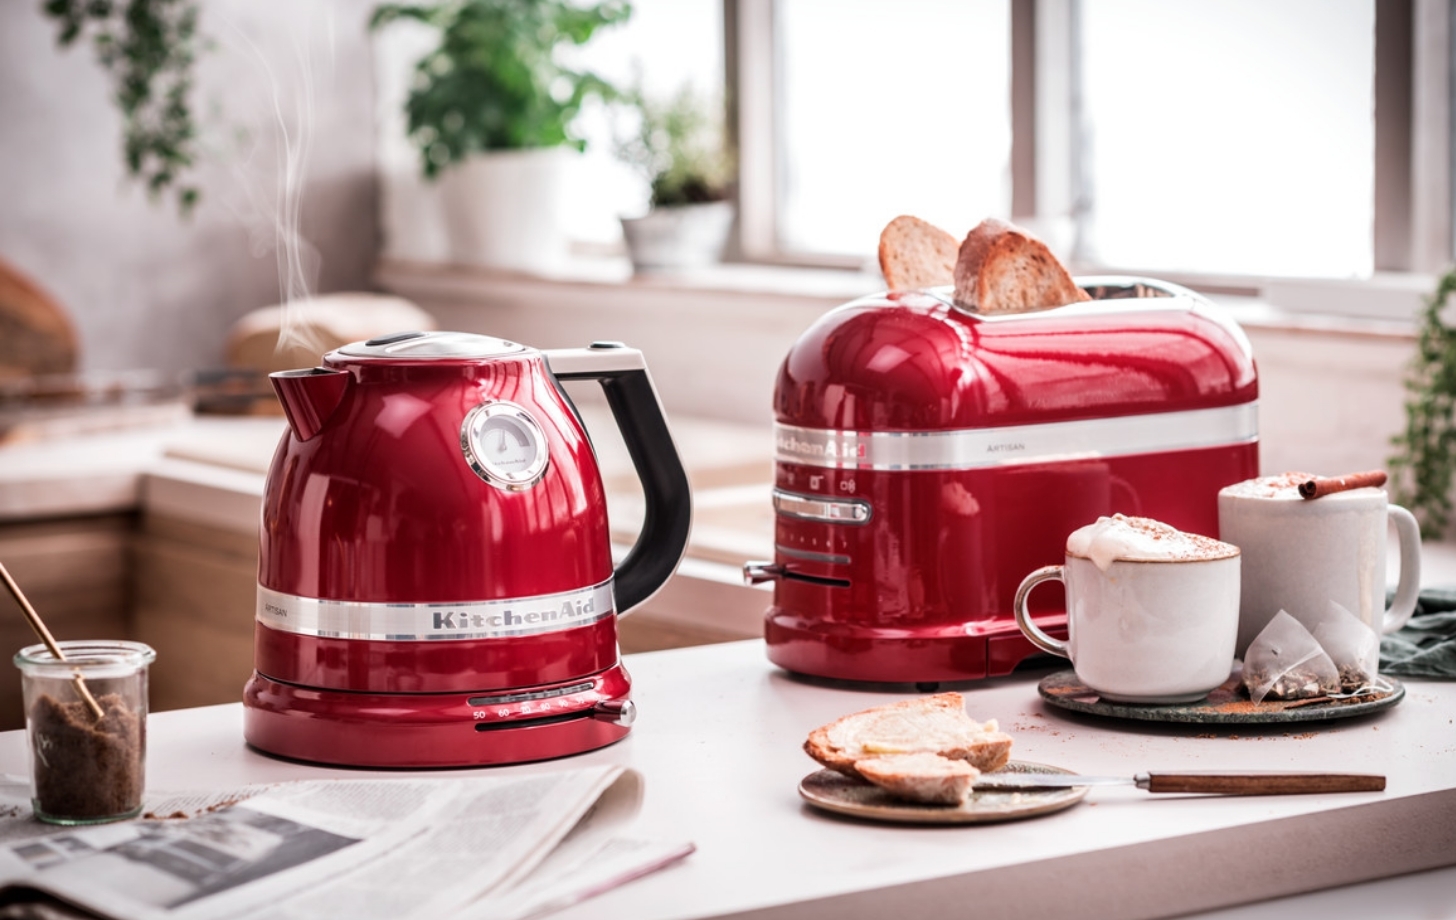 Red Artisan breakfast set with kettle and toaster